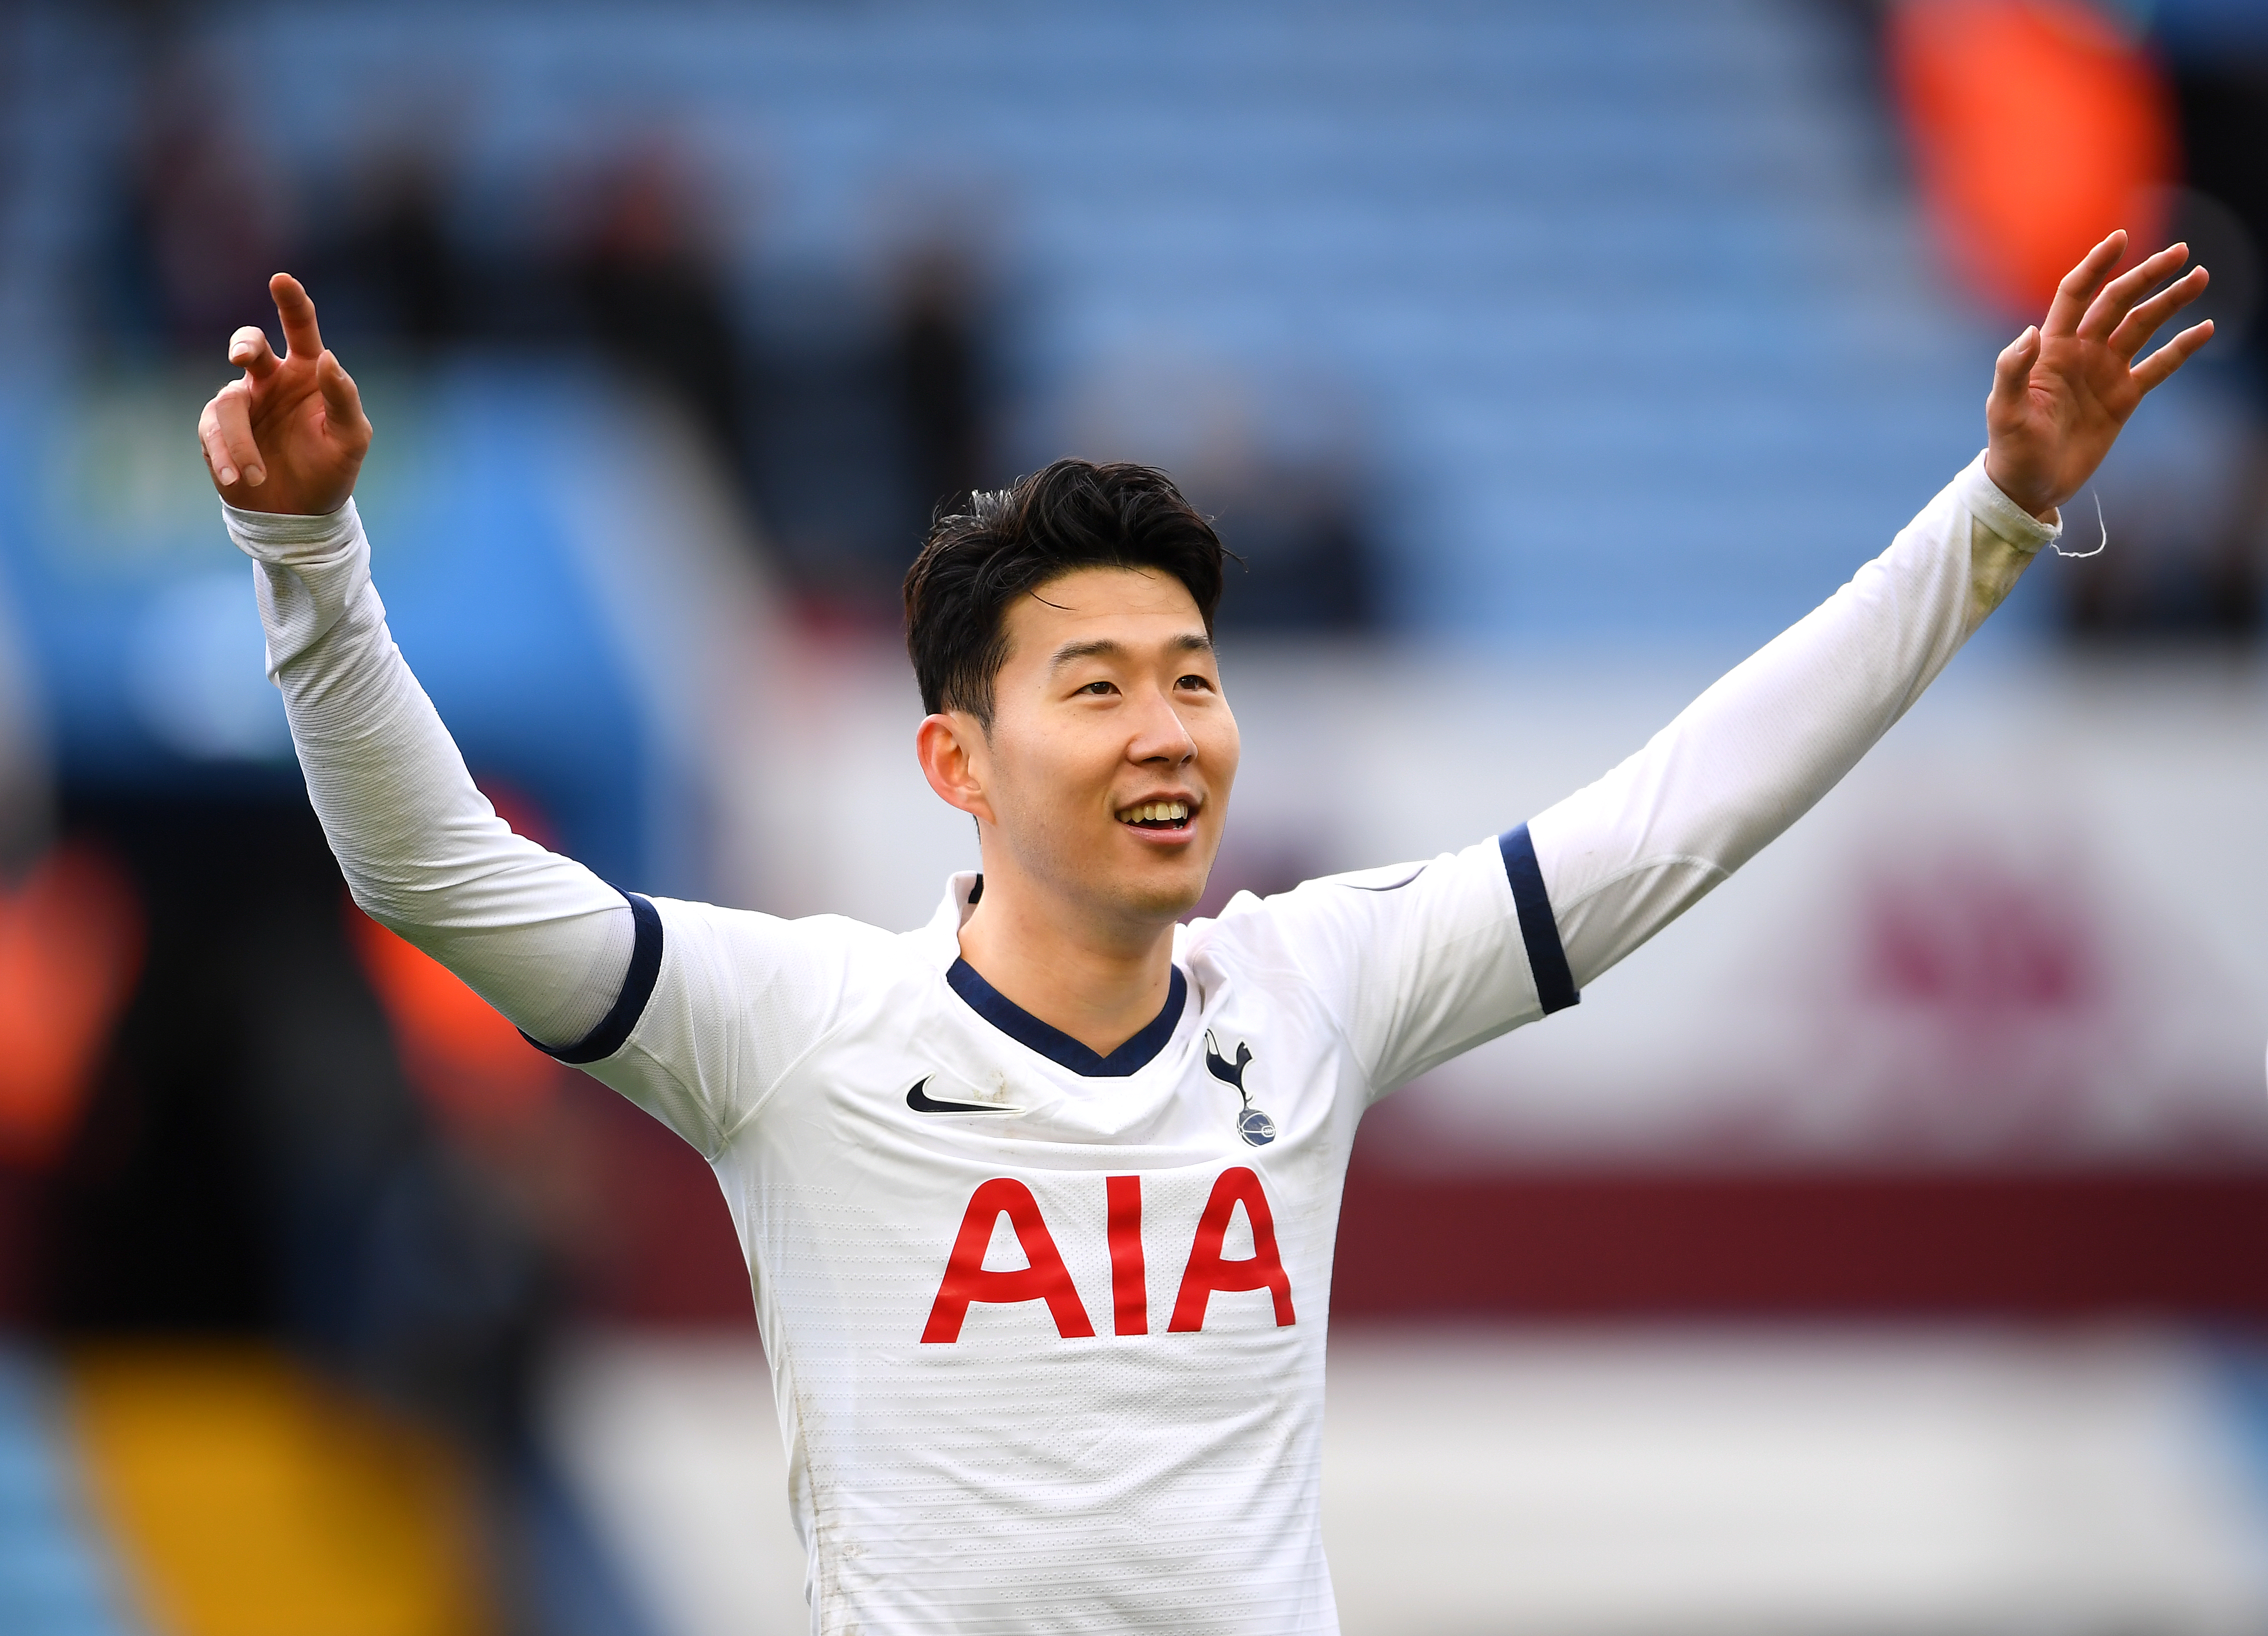 Son Heung-min's absence will be a major blow for Tottenham (Photo by Laurence Griffiths/Getty Images)